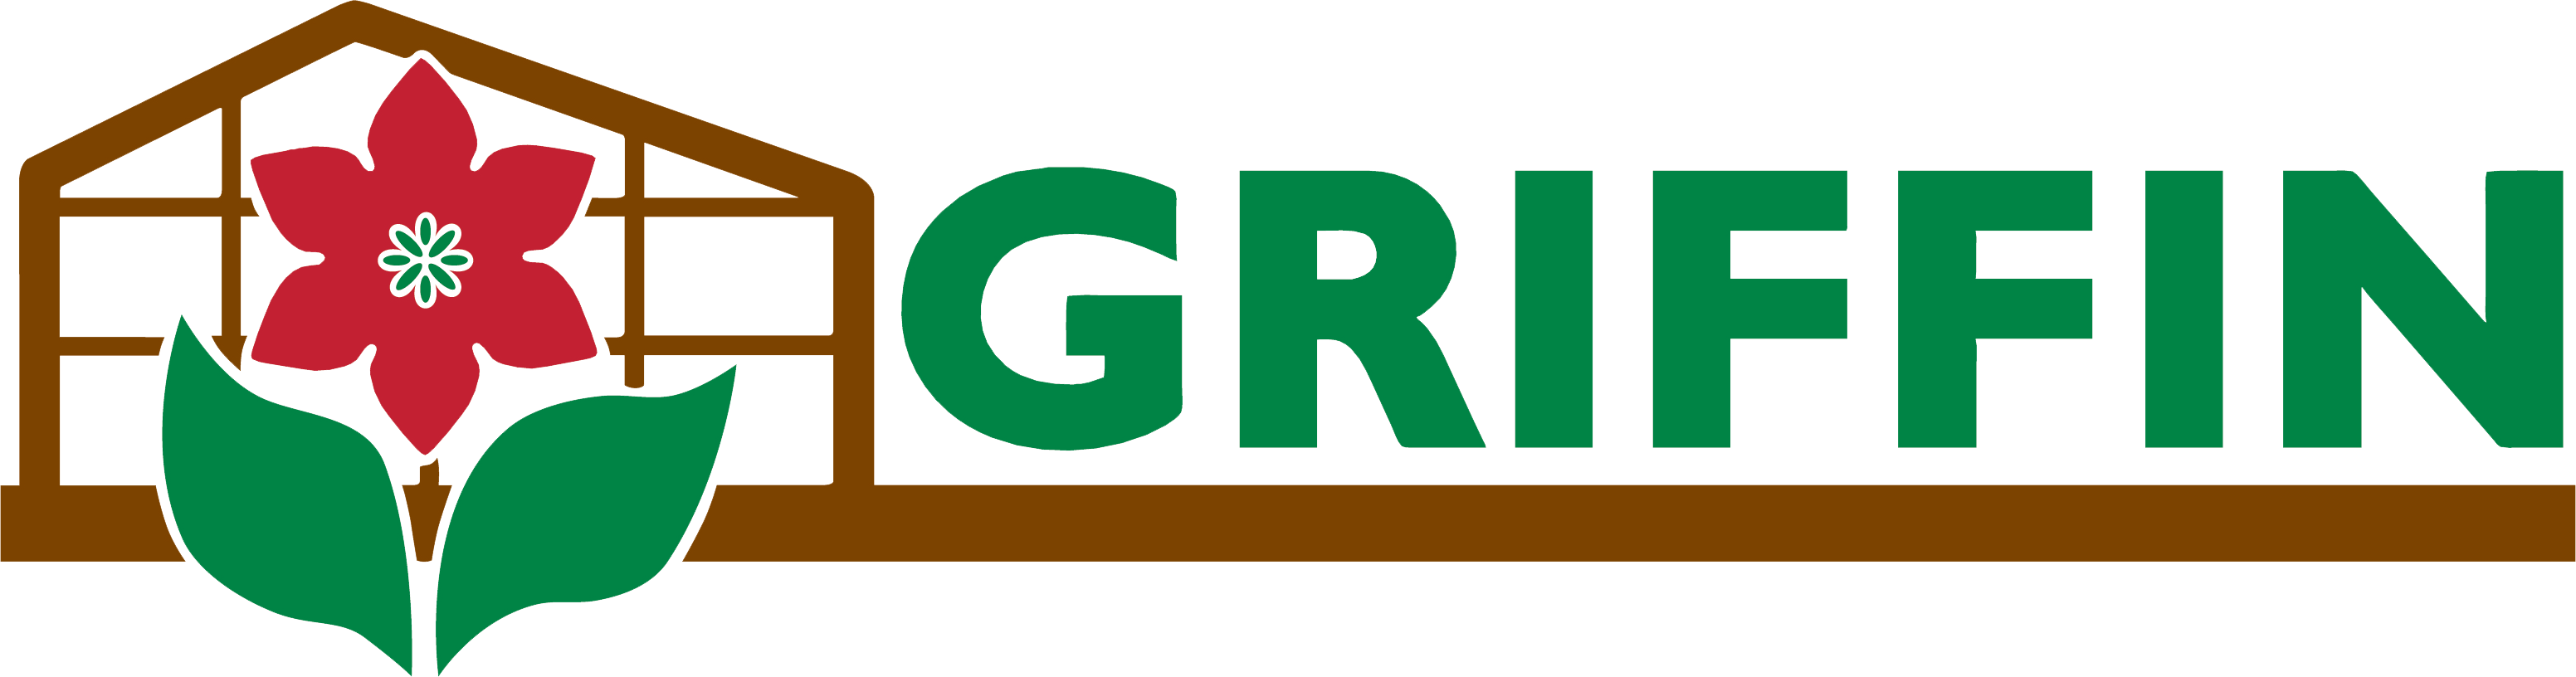 Griffin Greenhouse Supplies, Inc.